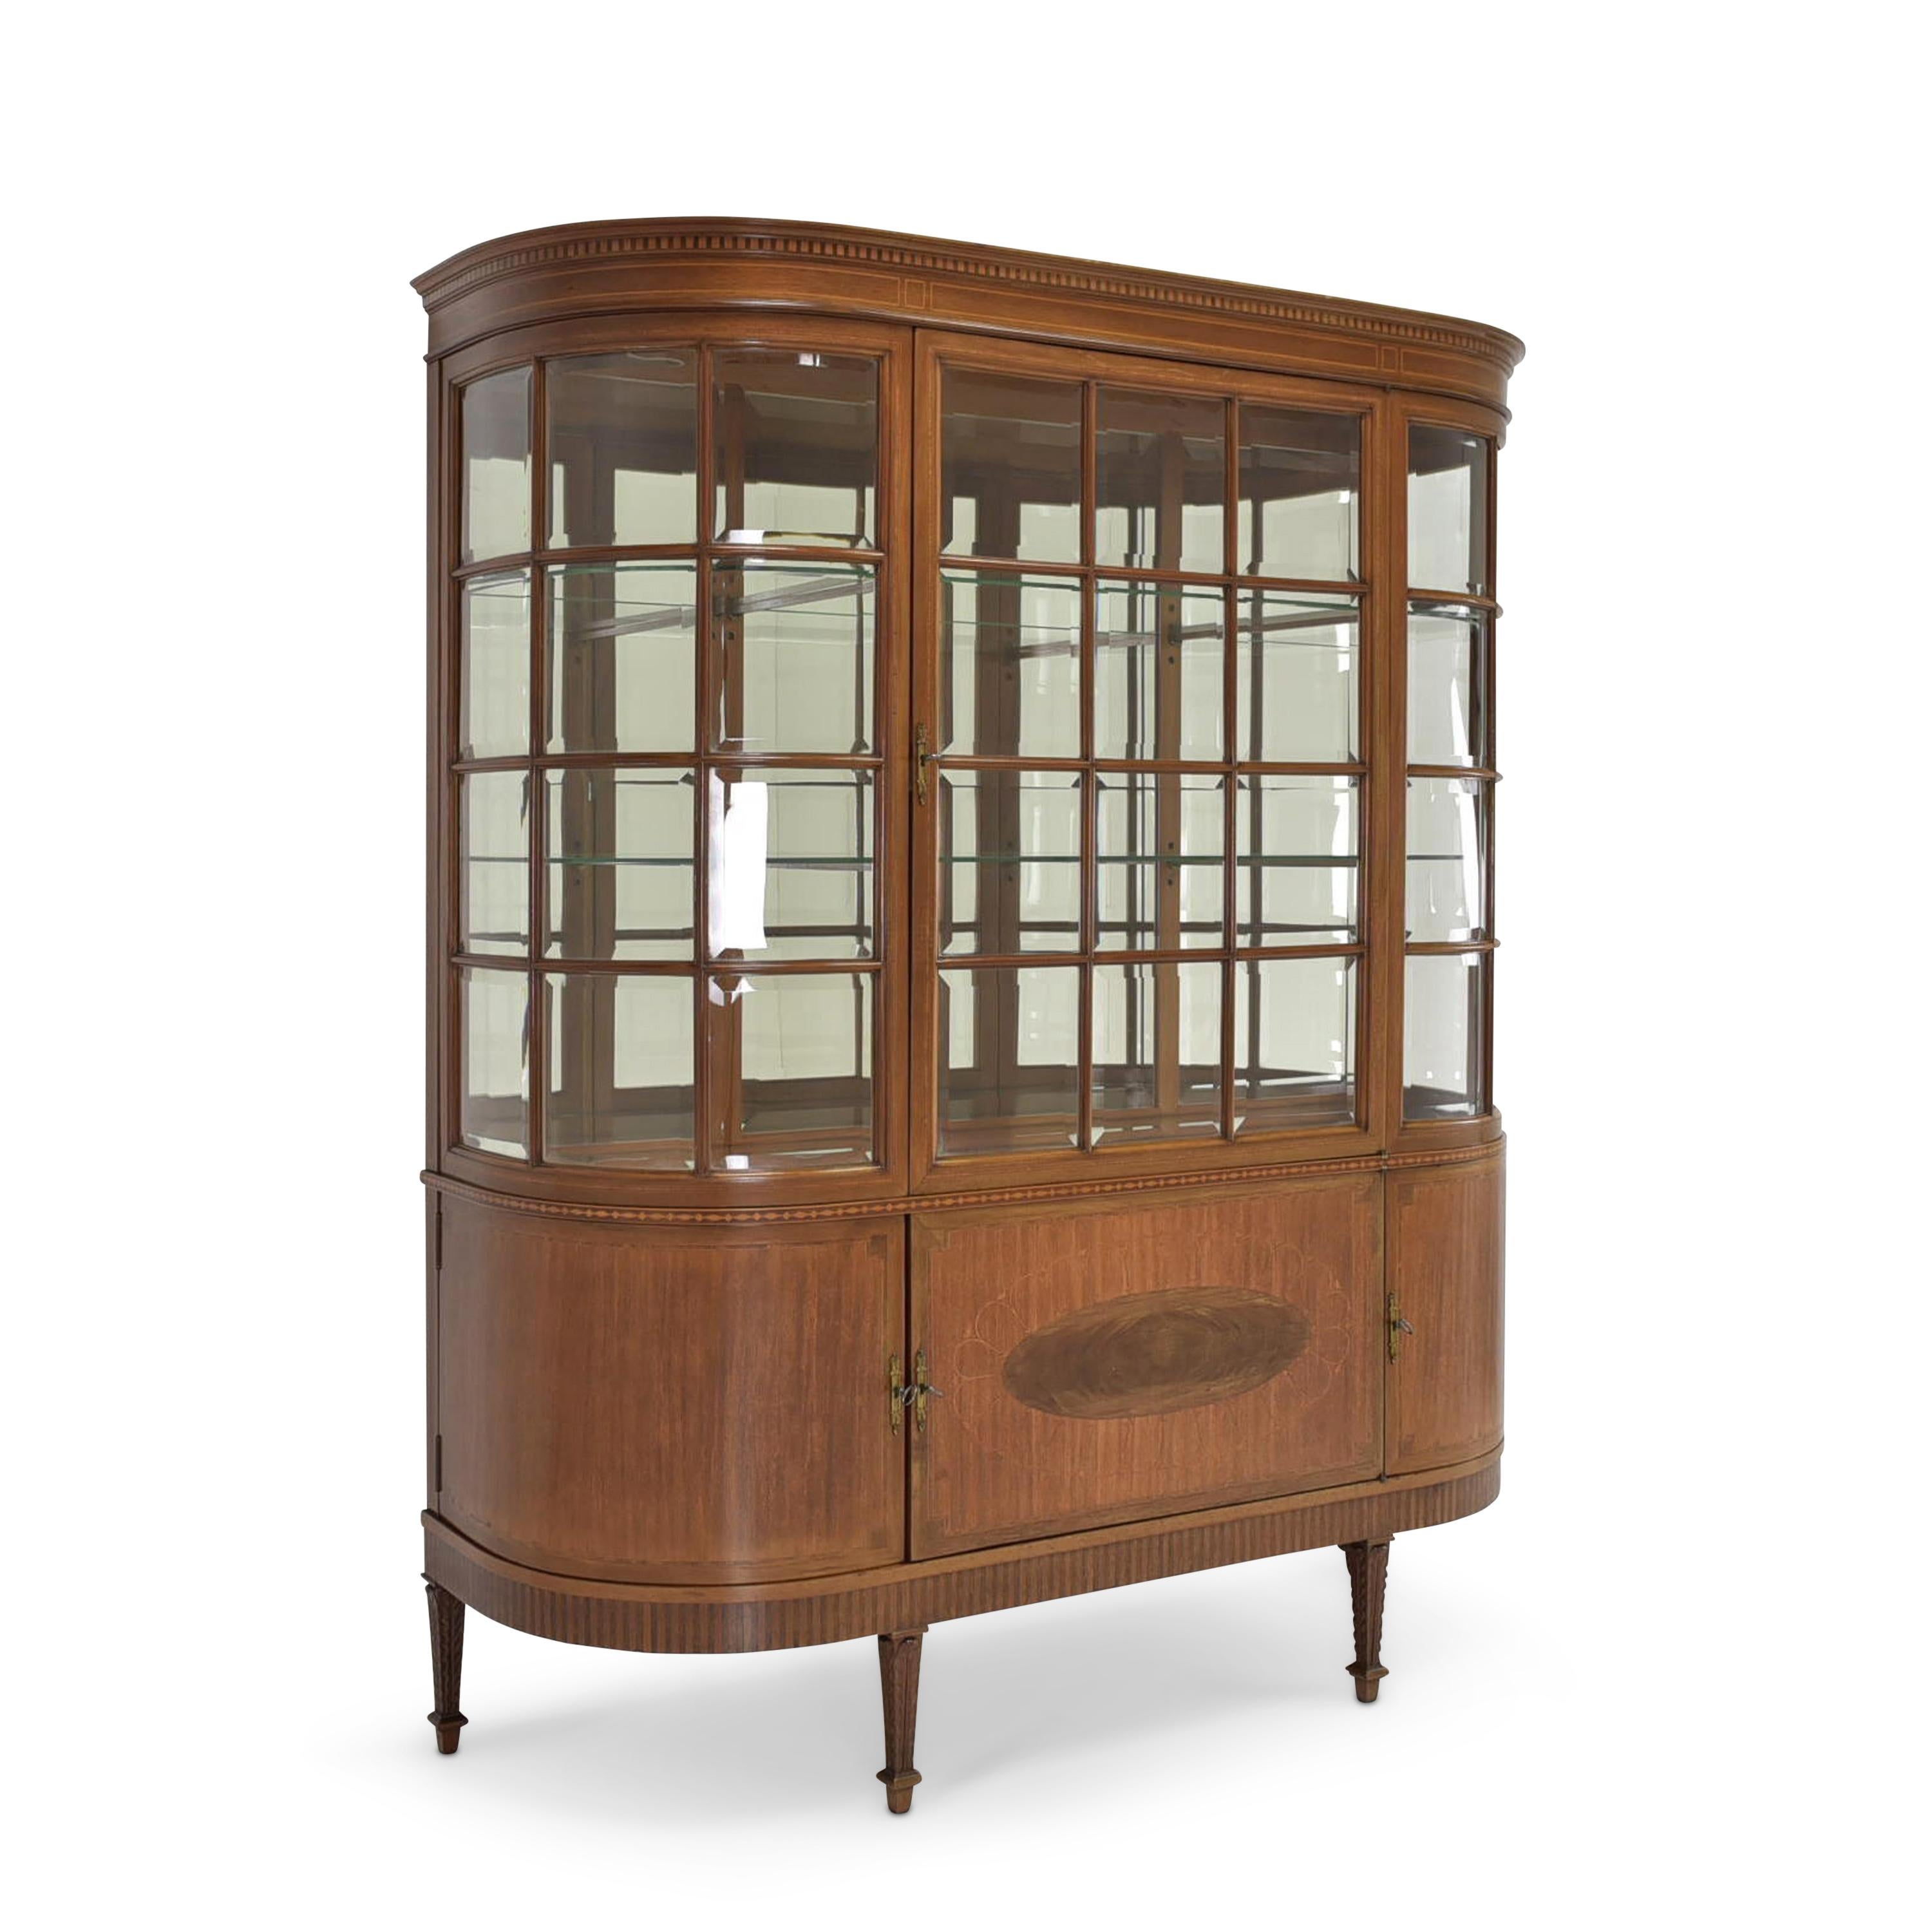 Showcase restored Art Deco around 1925 mahogany showcase

Features:
Interior solid oak, doors inside bird's eye maple
Three-sided glazed model with one door at the top and three in the base unit
Very high quality processing
Original glazing